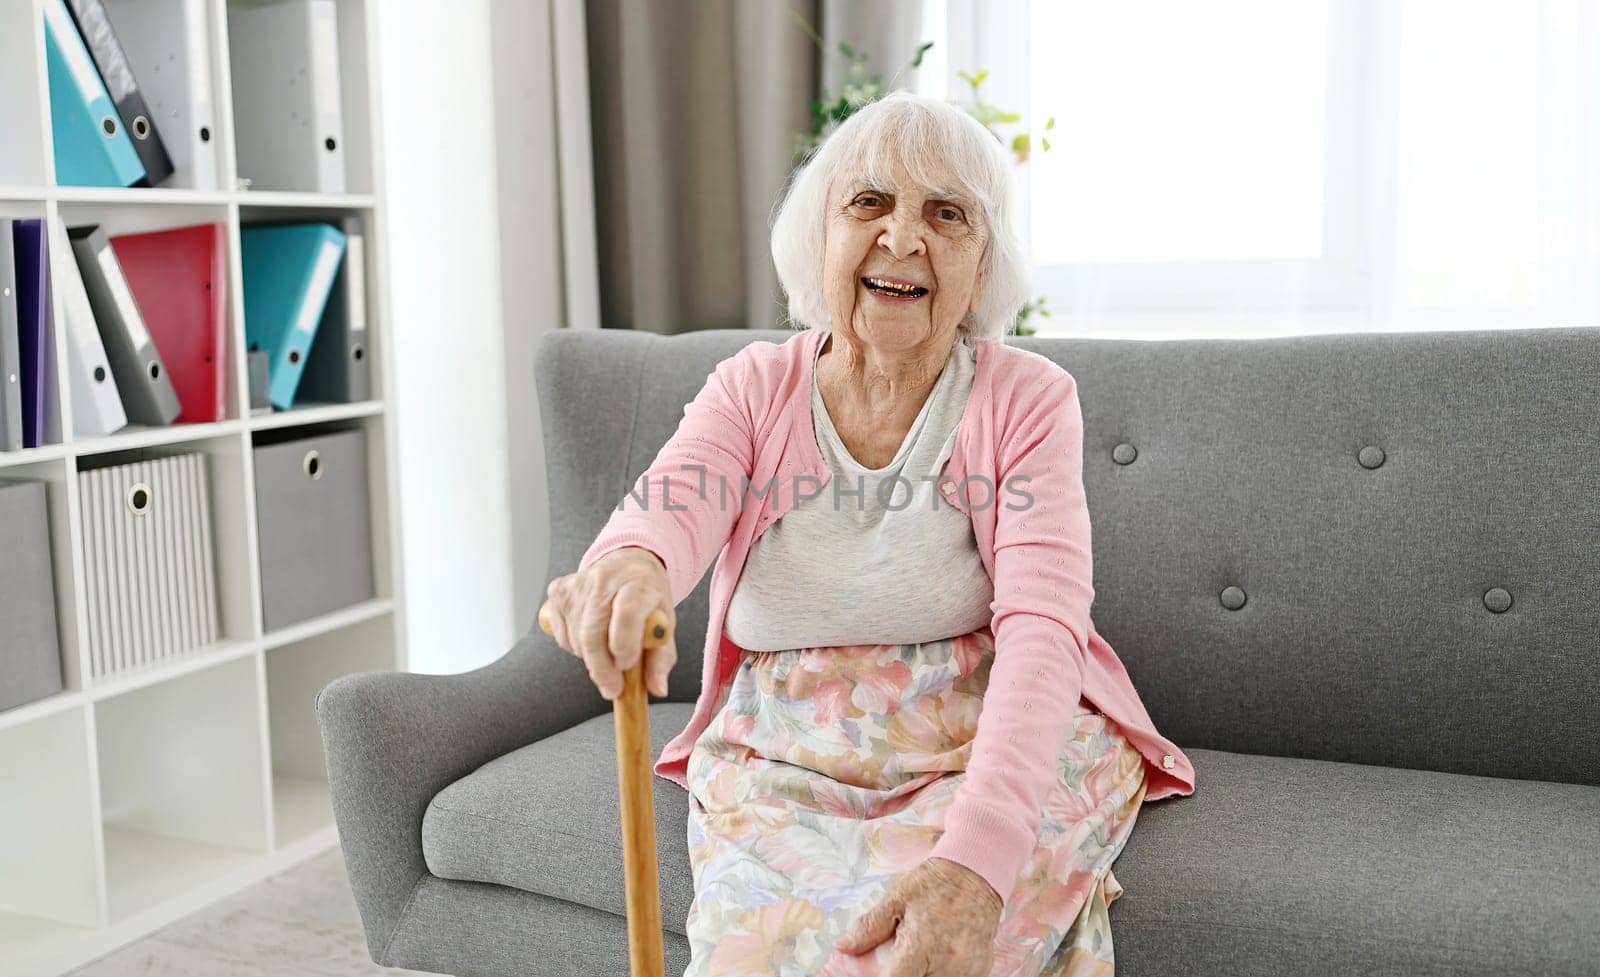 Elderly Woman Sitting On A Living Room Sofa With Cane Laughing And Looking Into The Camera